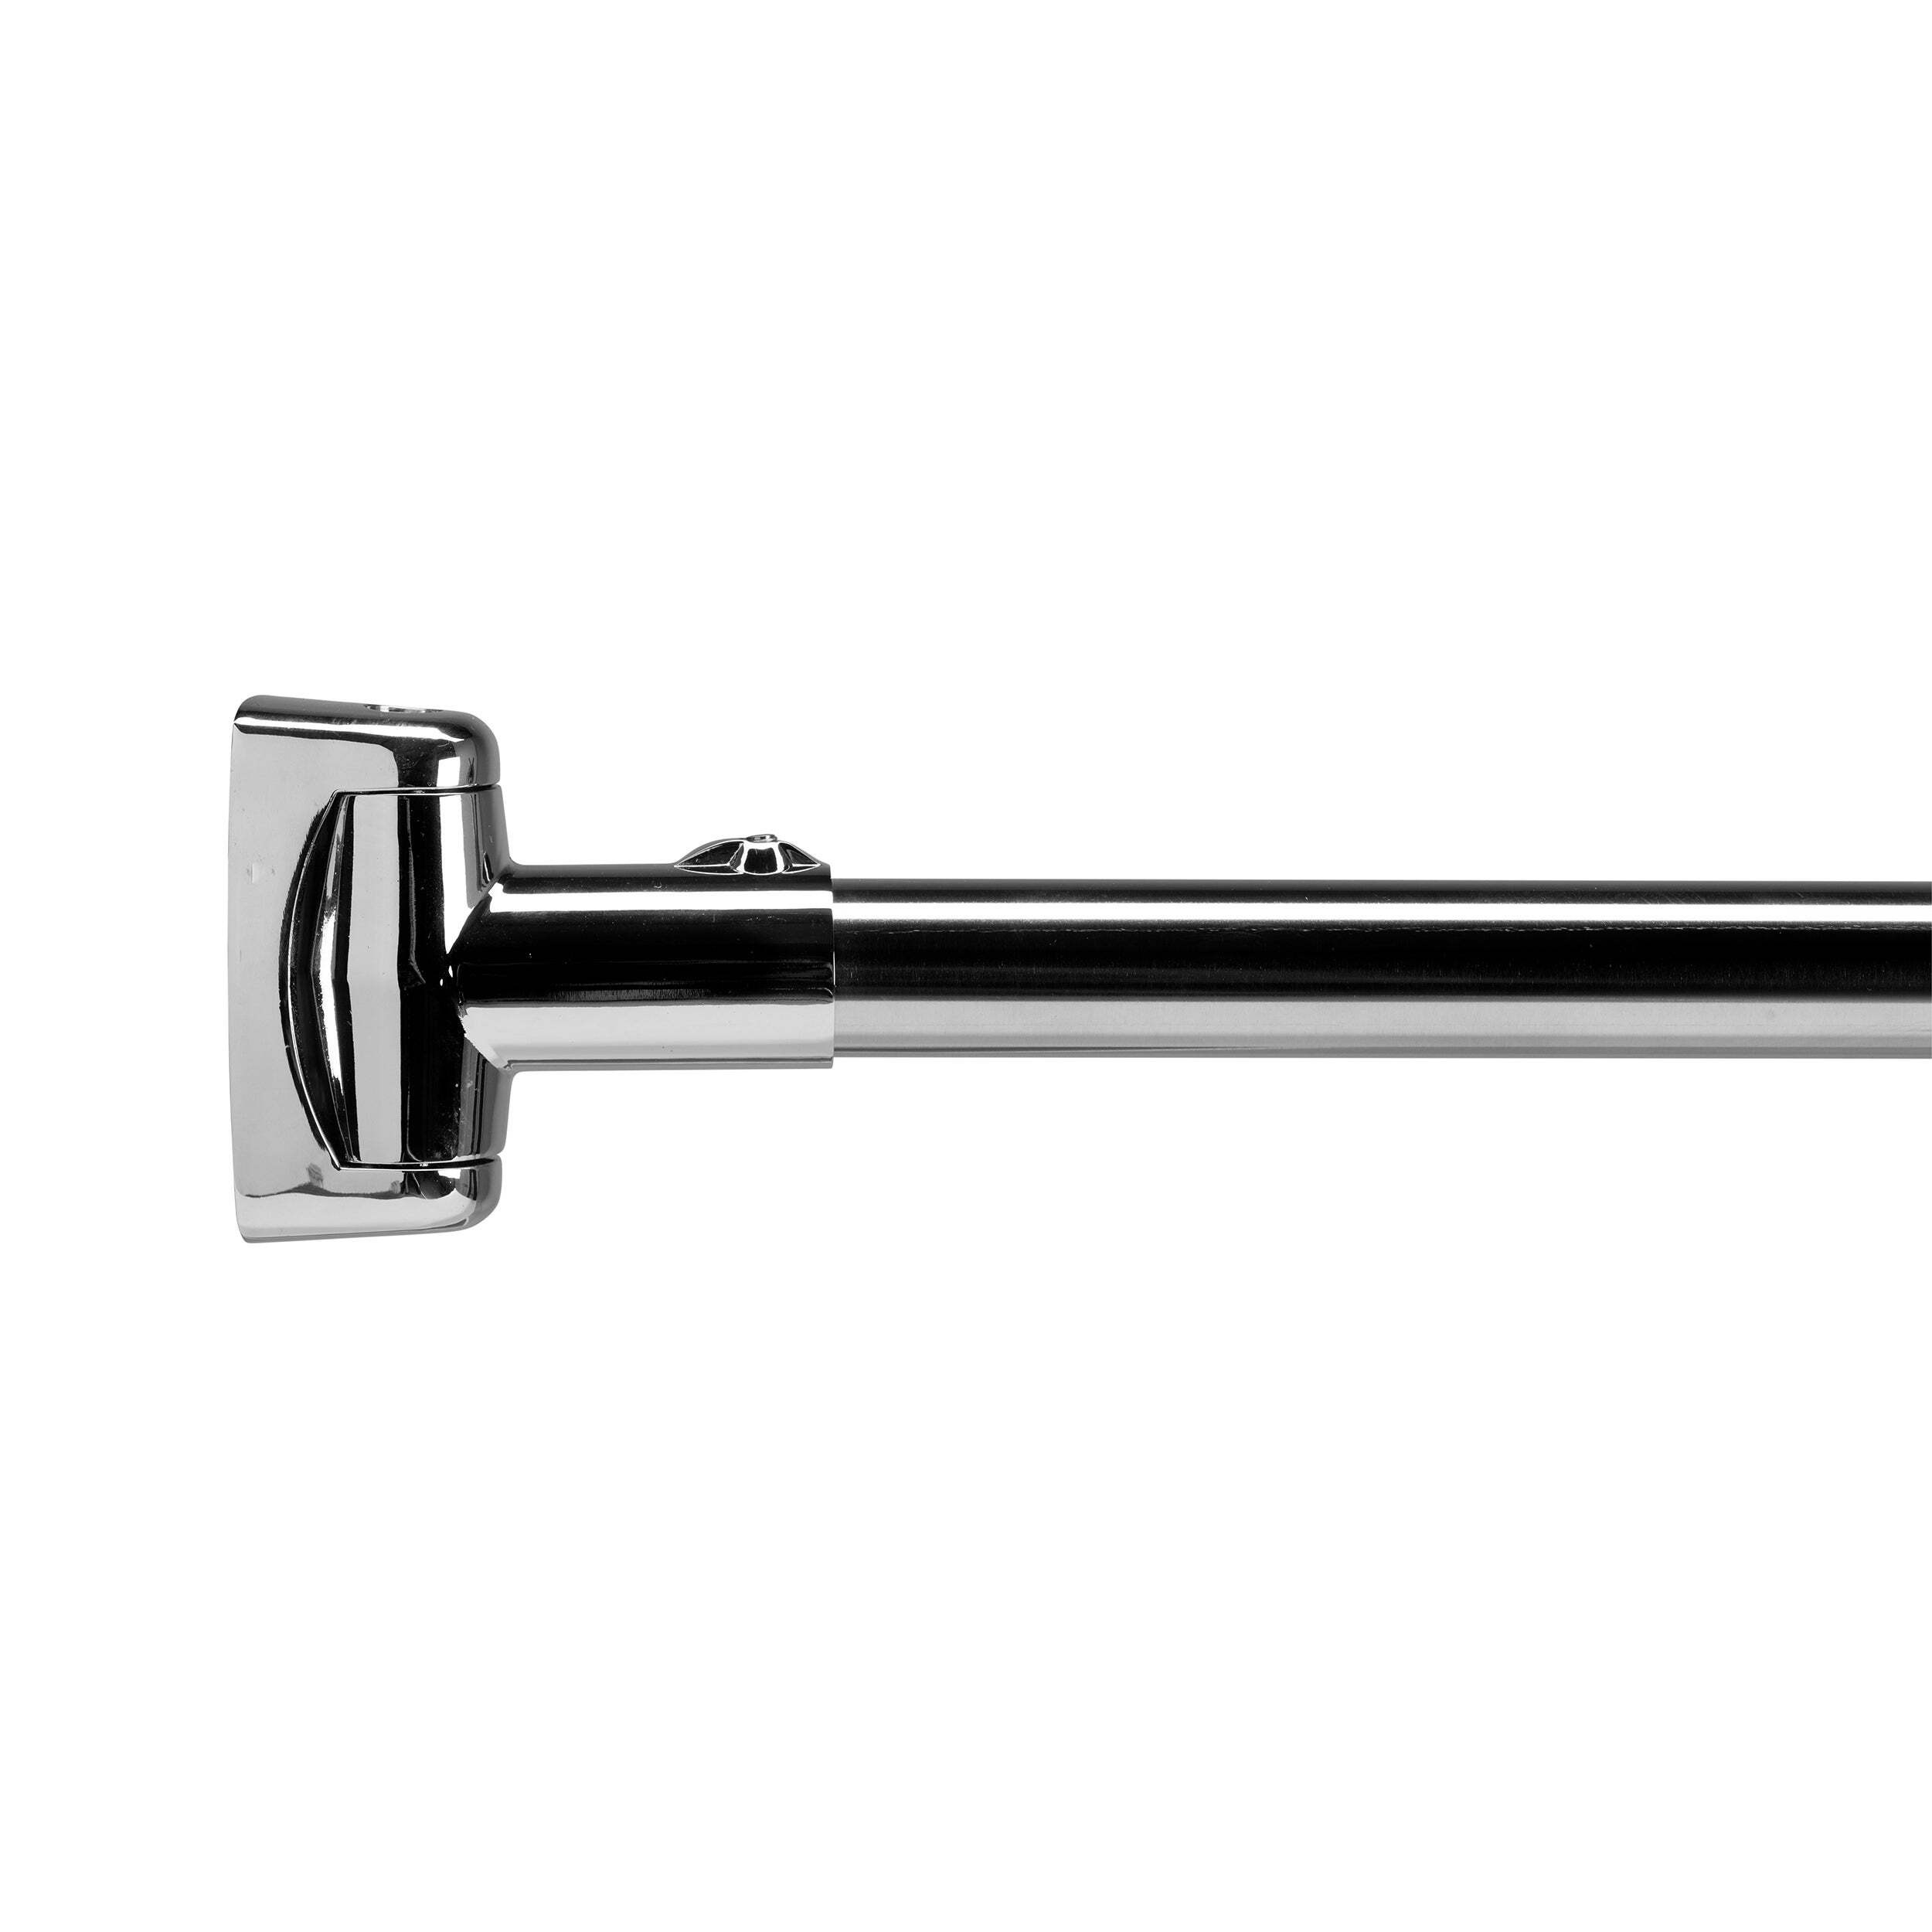 Premium Extendable Curved Stainless Steel Shower Rail Silver